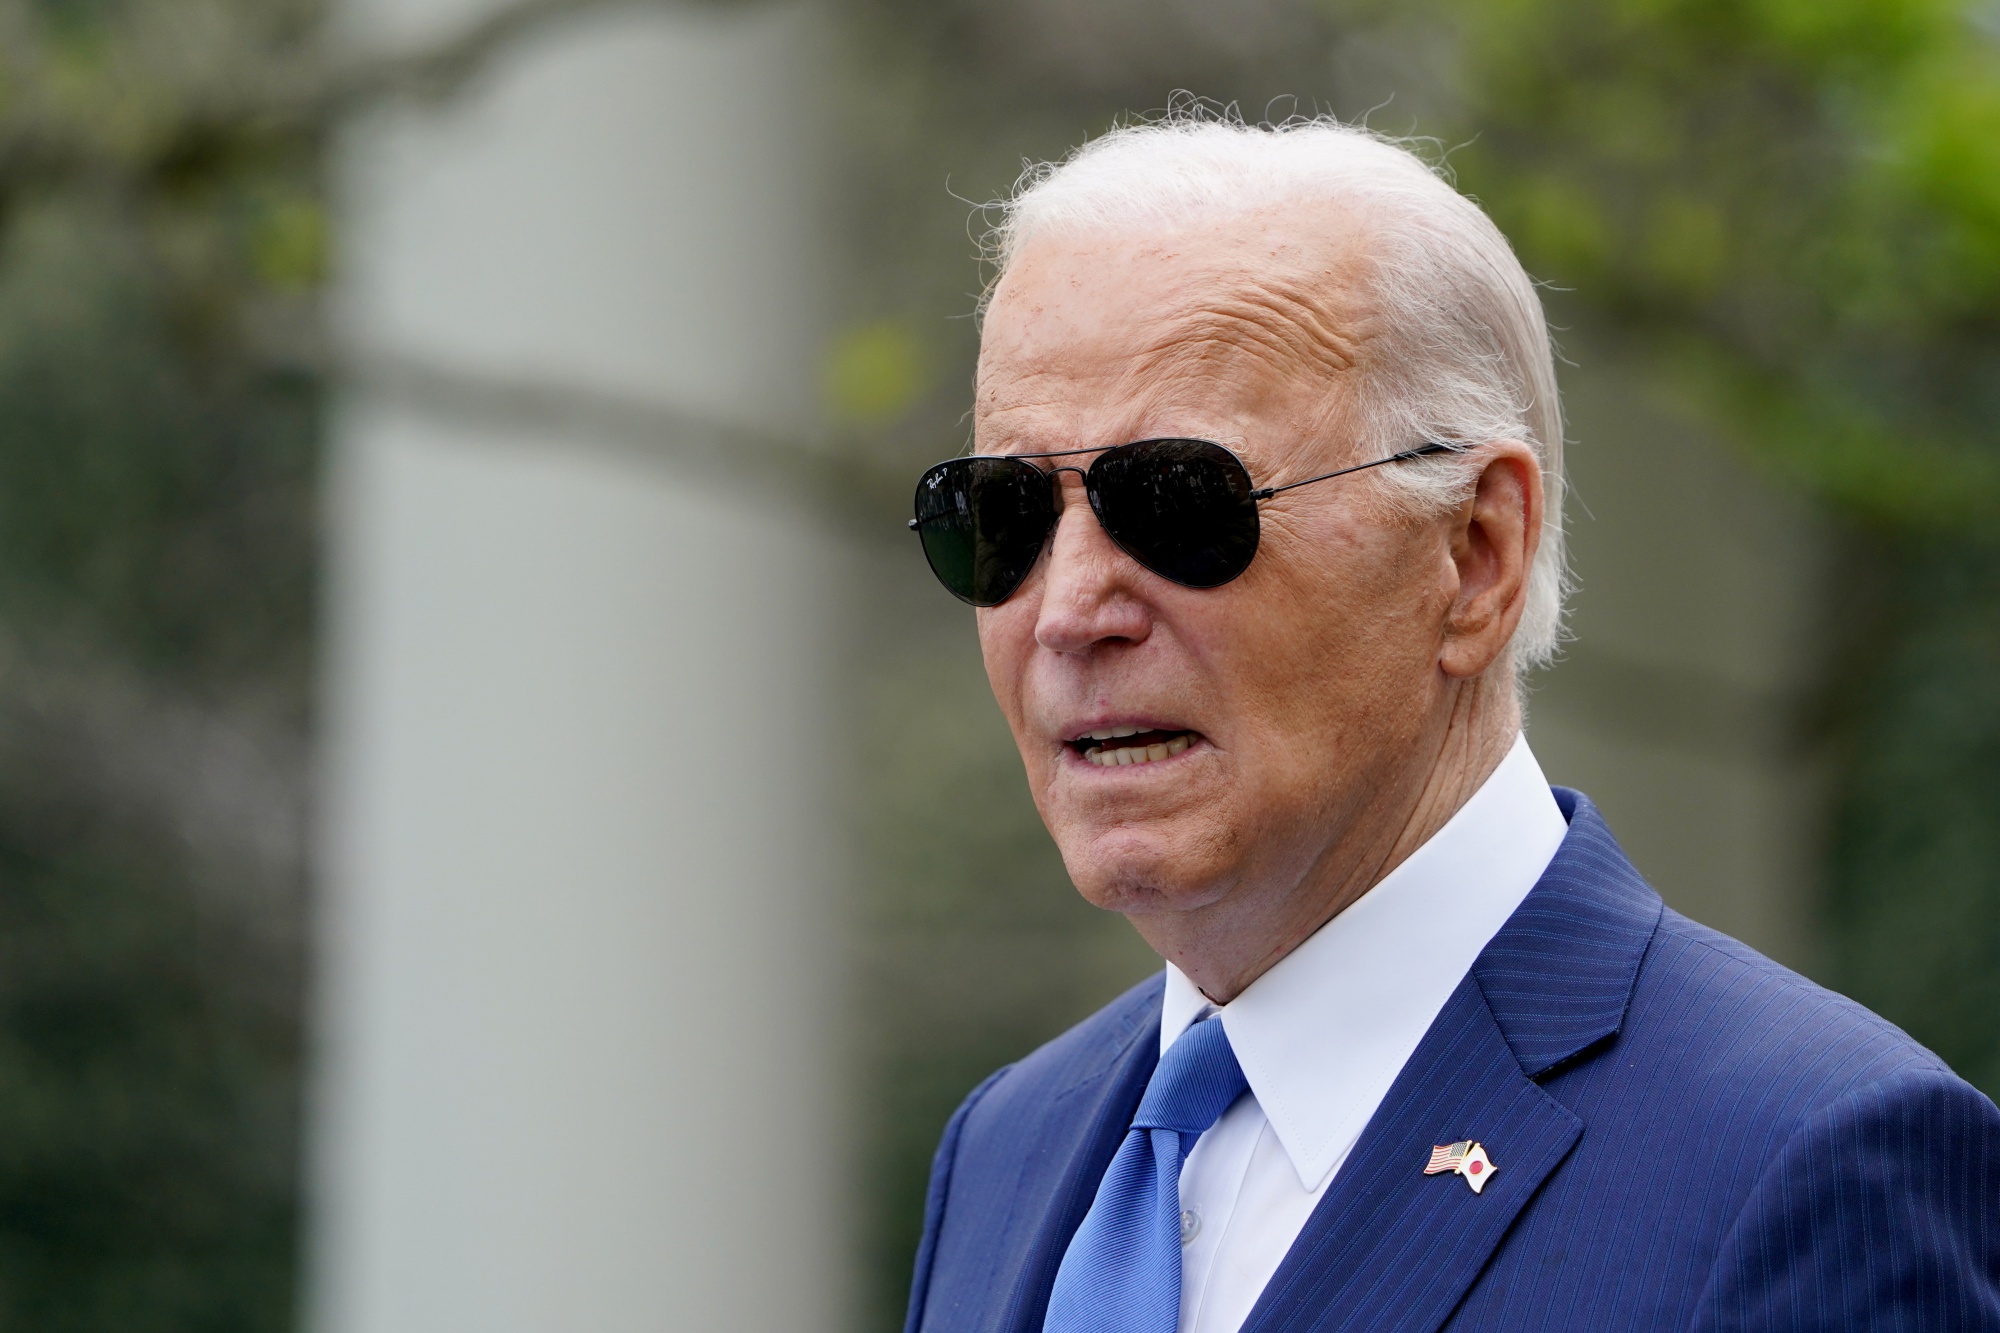 Survey Shows Declining Support for Biden Among Black Voters in Key Swing States